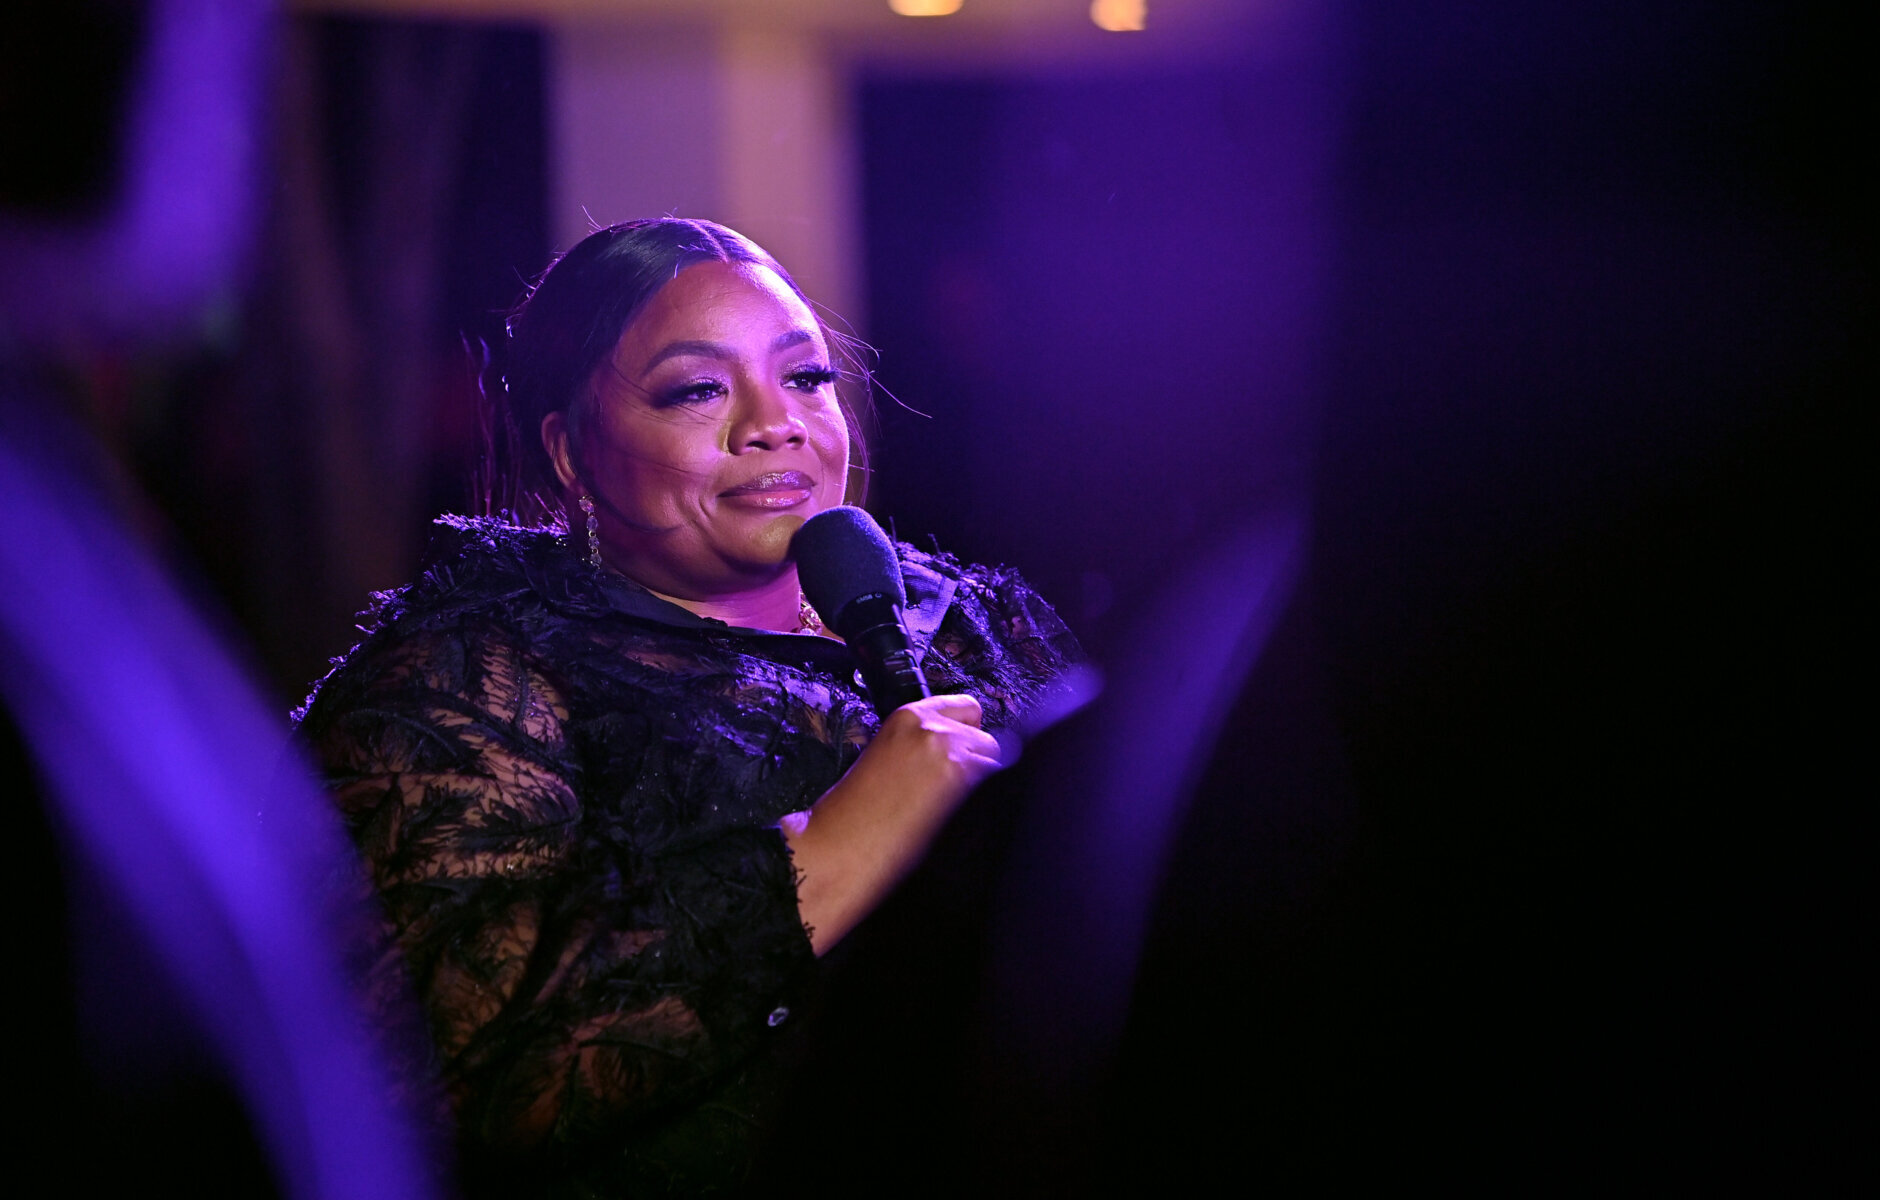 BEVERLY HILLS, CALIFORNIA - NOVEMBER 19: In this image released on November 26, Ms. Pat speaks at the Soul Train Awards 2023 on November 19, 2023 in Beverly Hills, California. (Photo by Paras Griffin/Getty Images for BET)